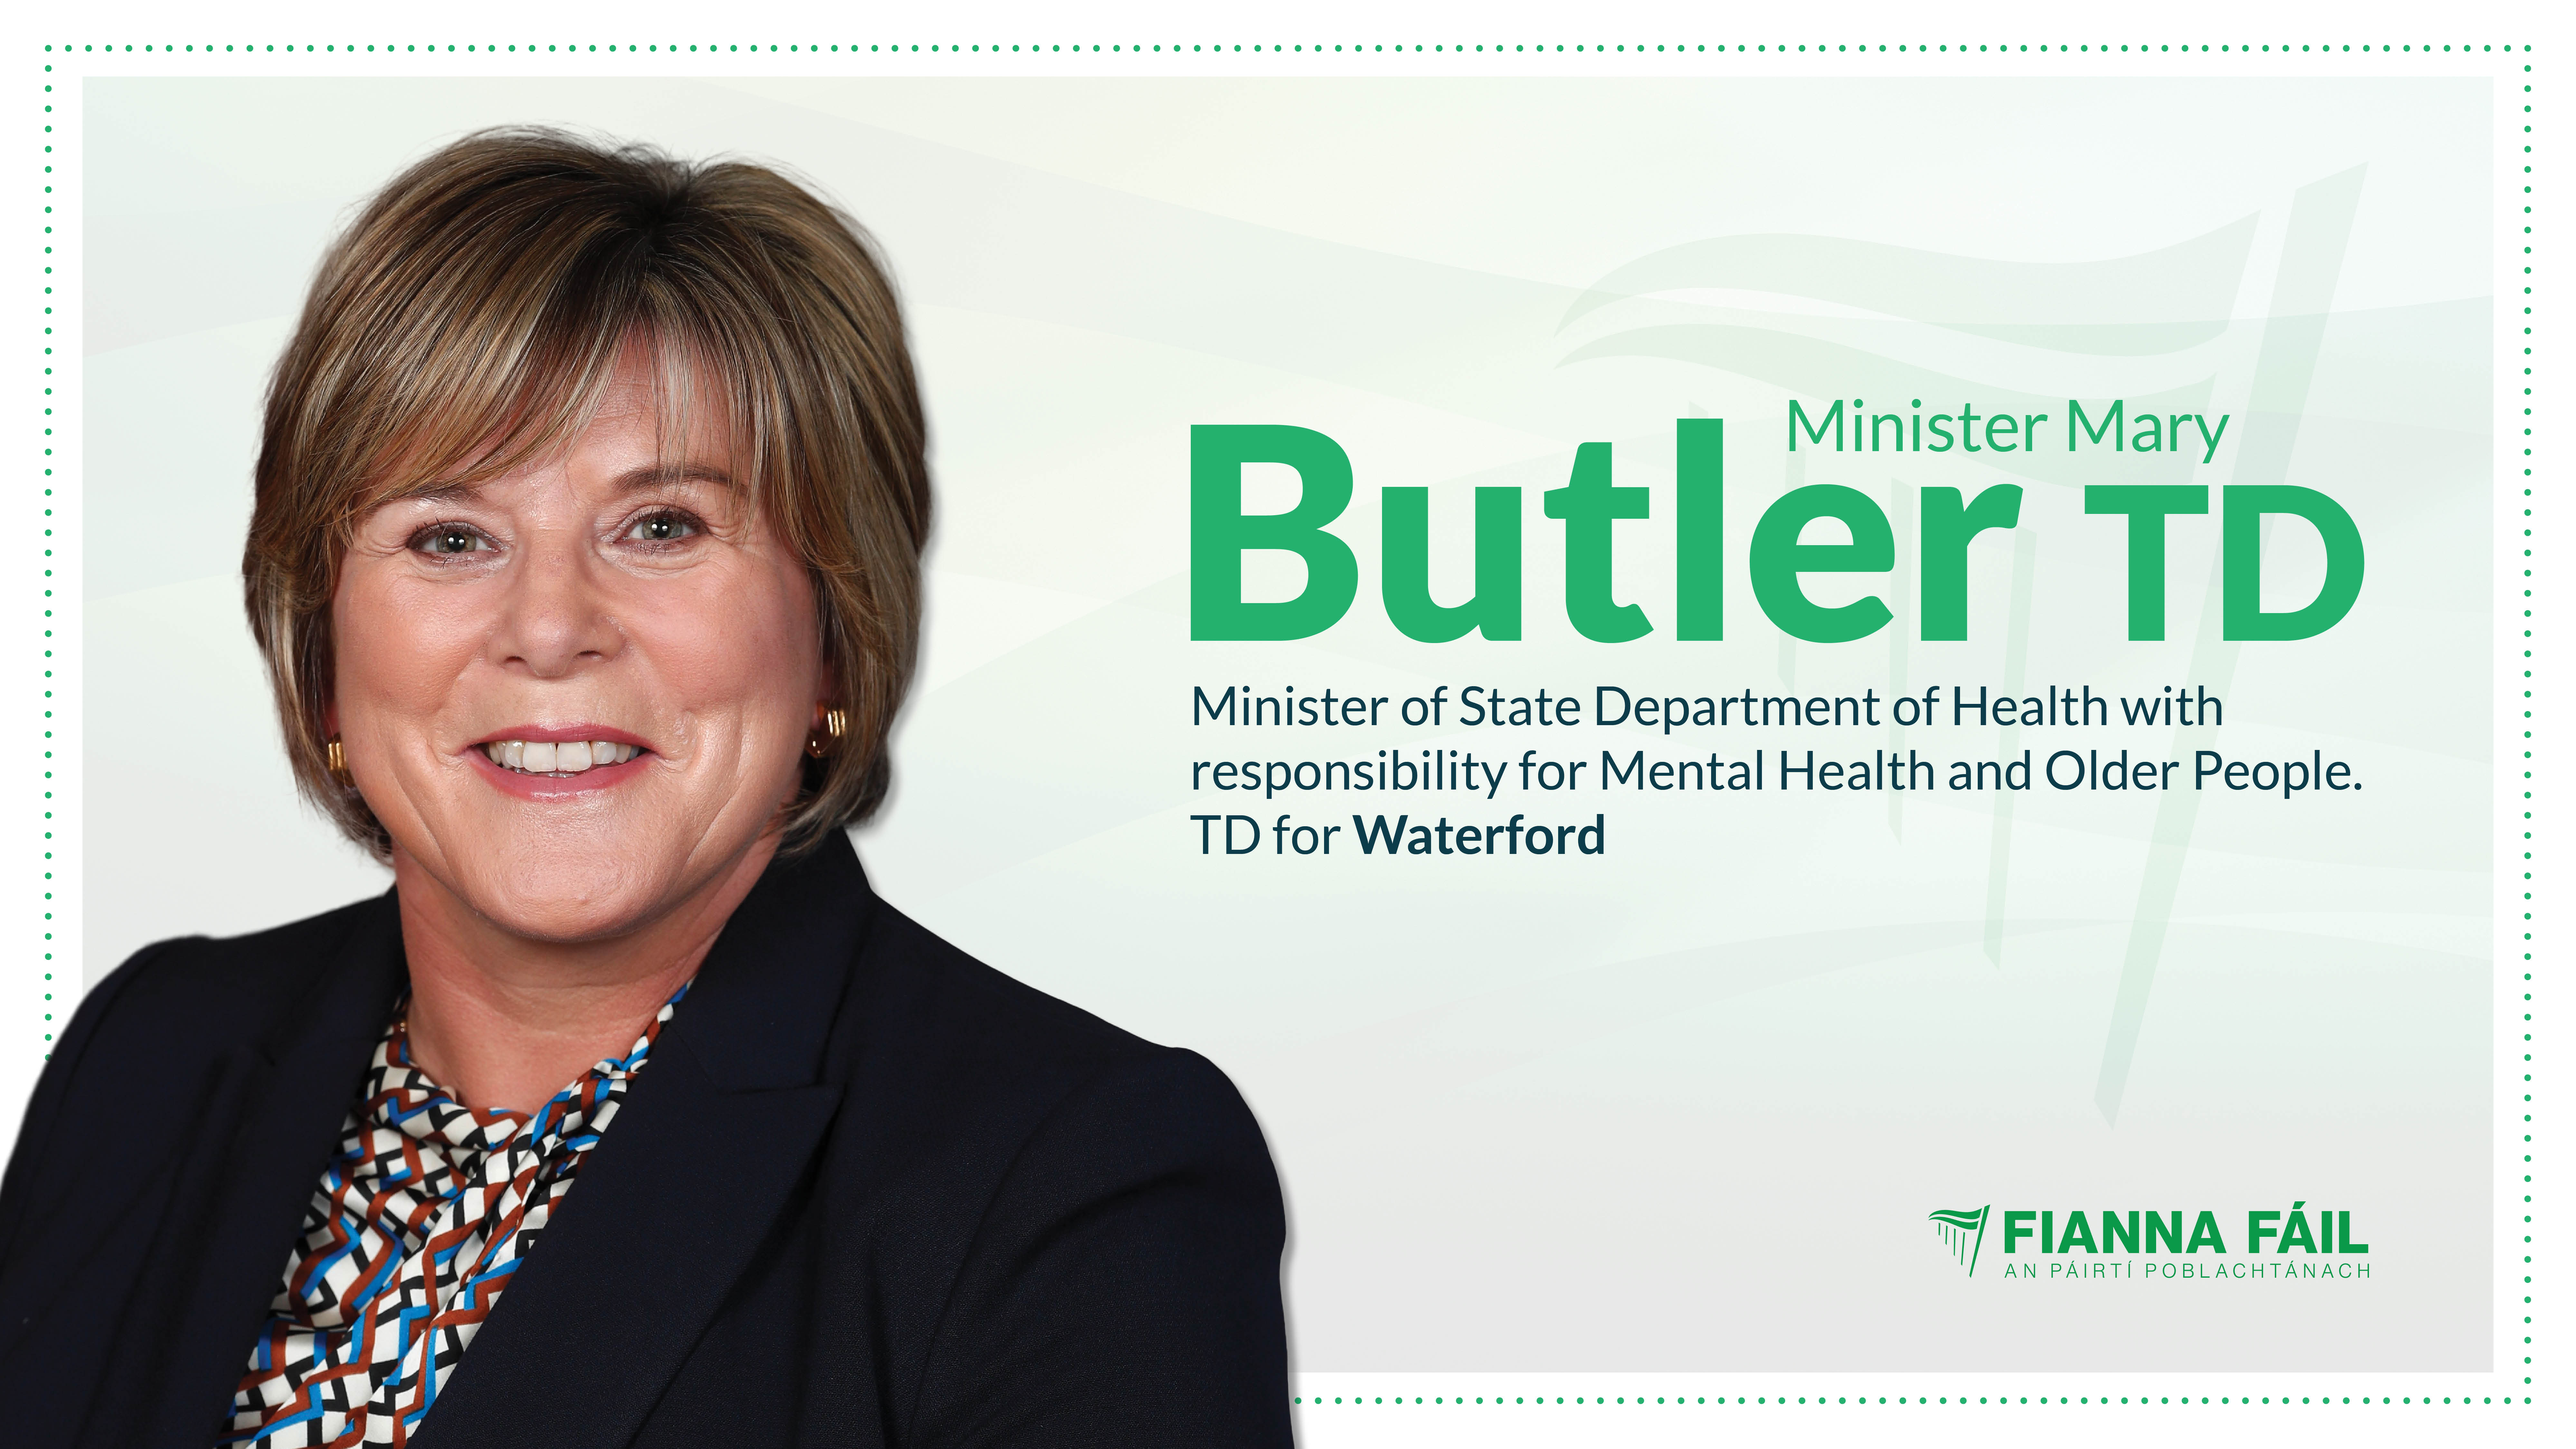 Minister for Mental Health and Older People, Mary Butler, TD, Welcomes New Visitation Guidance for Nursing Homes